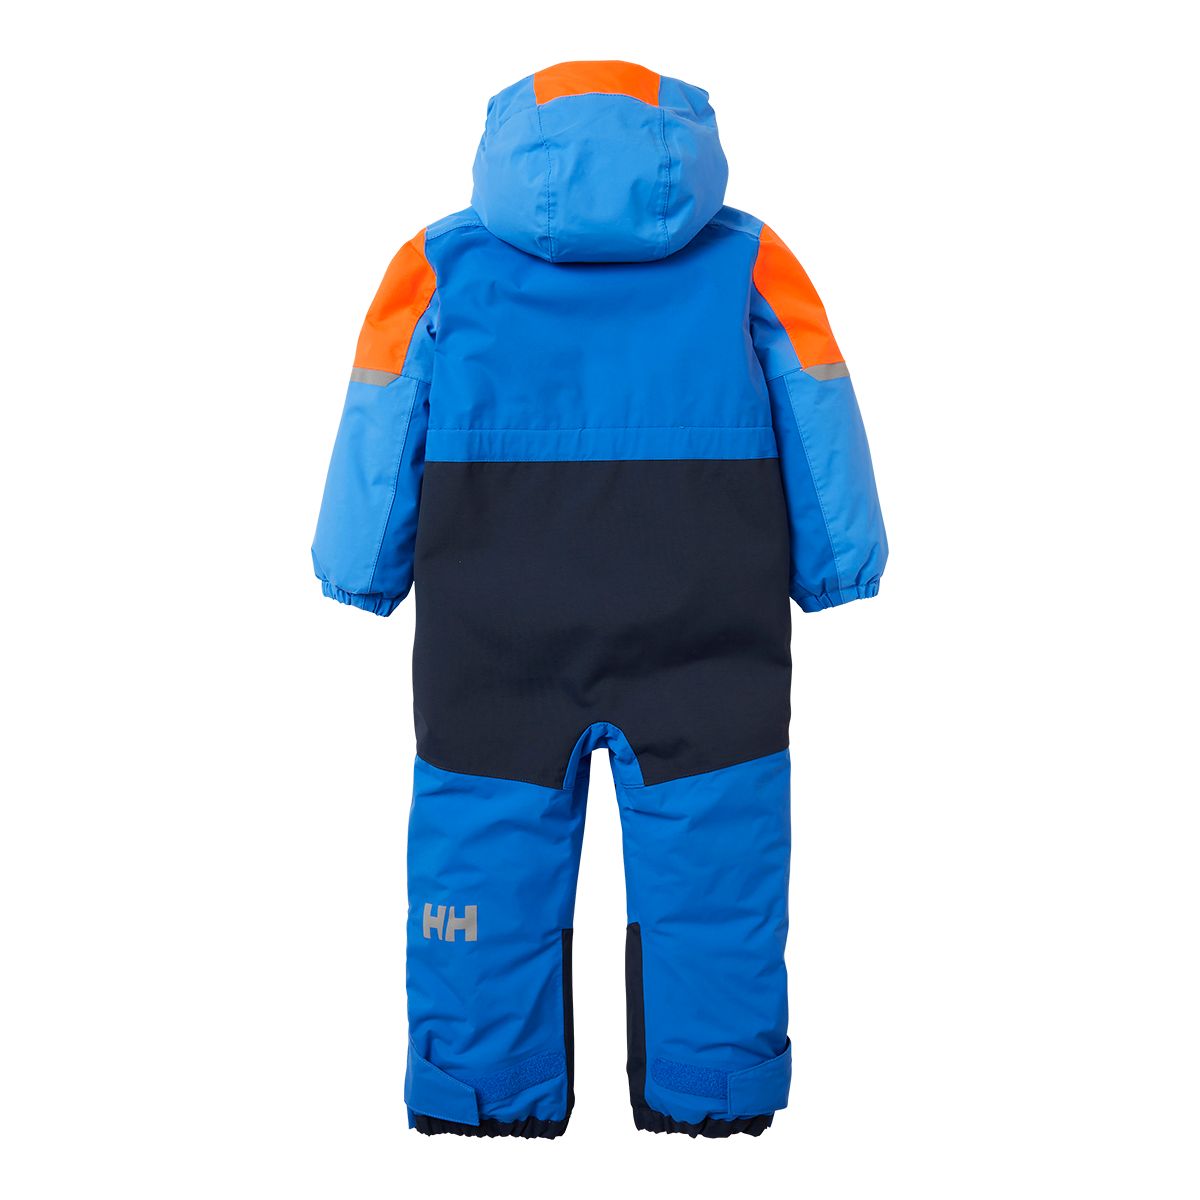 Helly Hansen Toddler Boys' 2-7 Rider 2.0 Insulated Suit